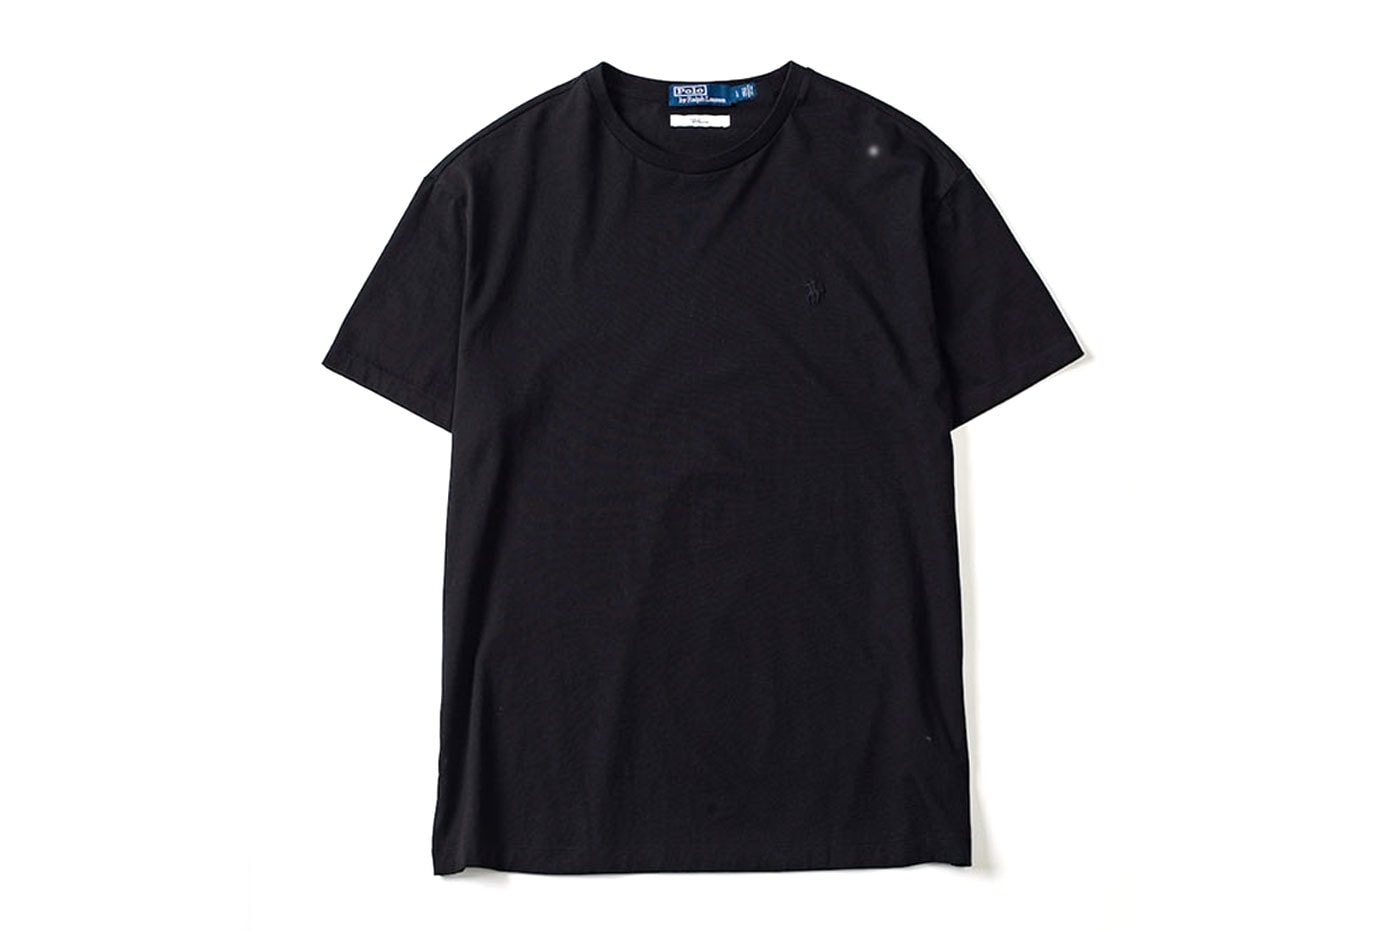 Polo Ralph Lauren Launches Exclusive "Black Collection" for Ron Herman sleek classics crew neck t-shirts sorts oxford shirts 